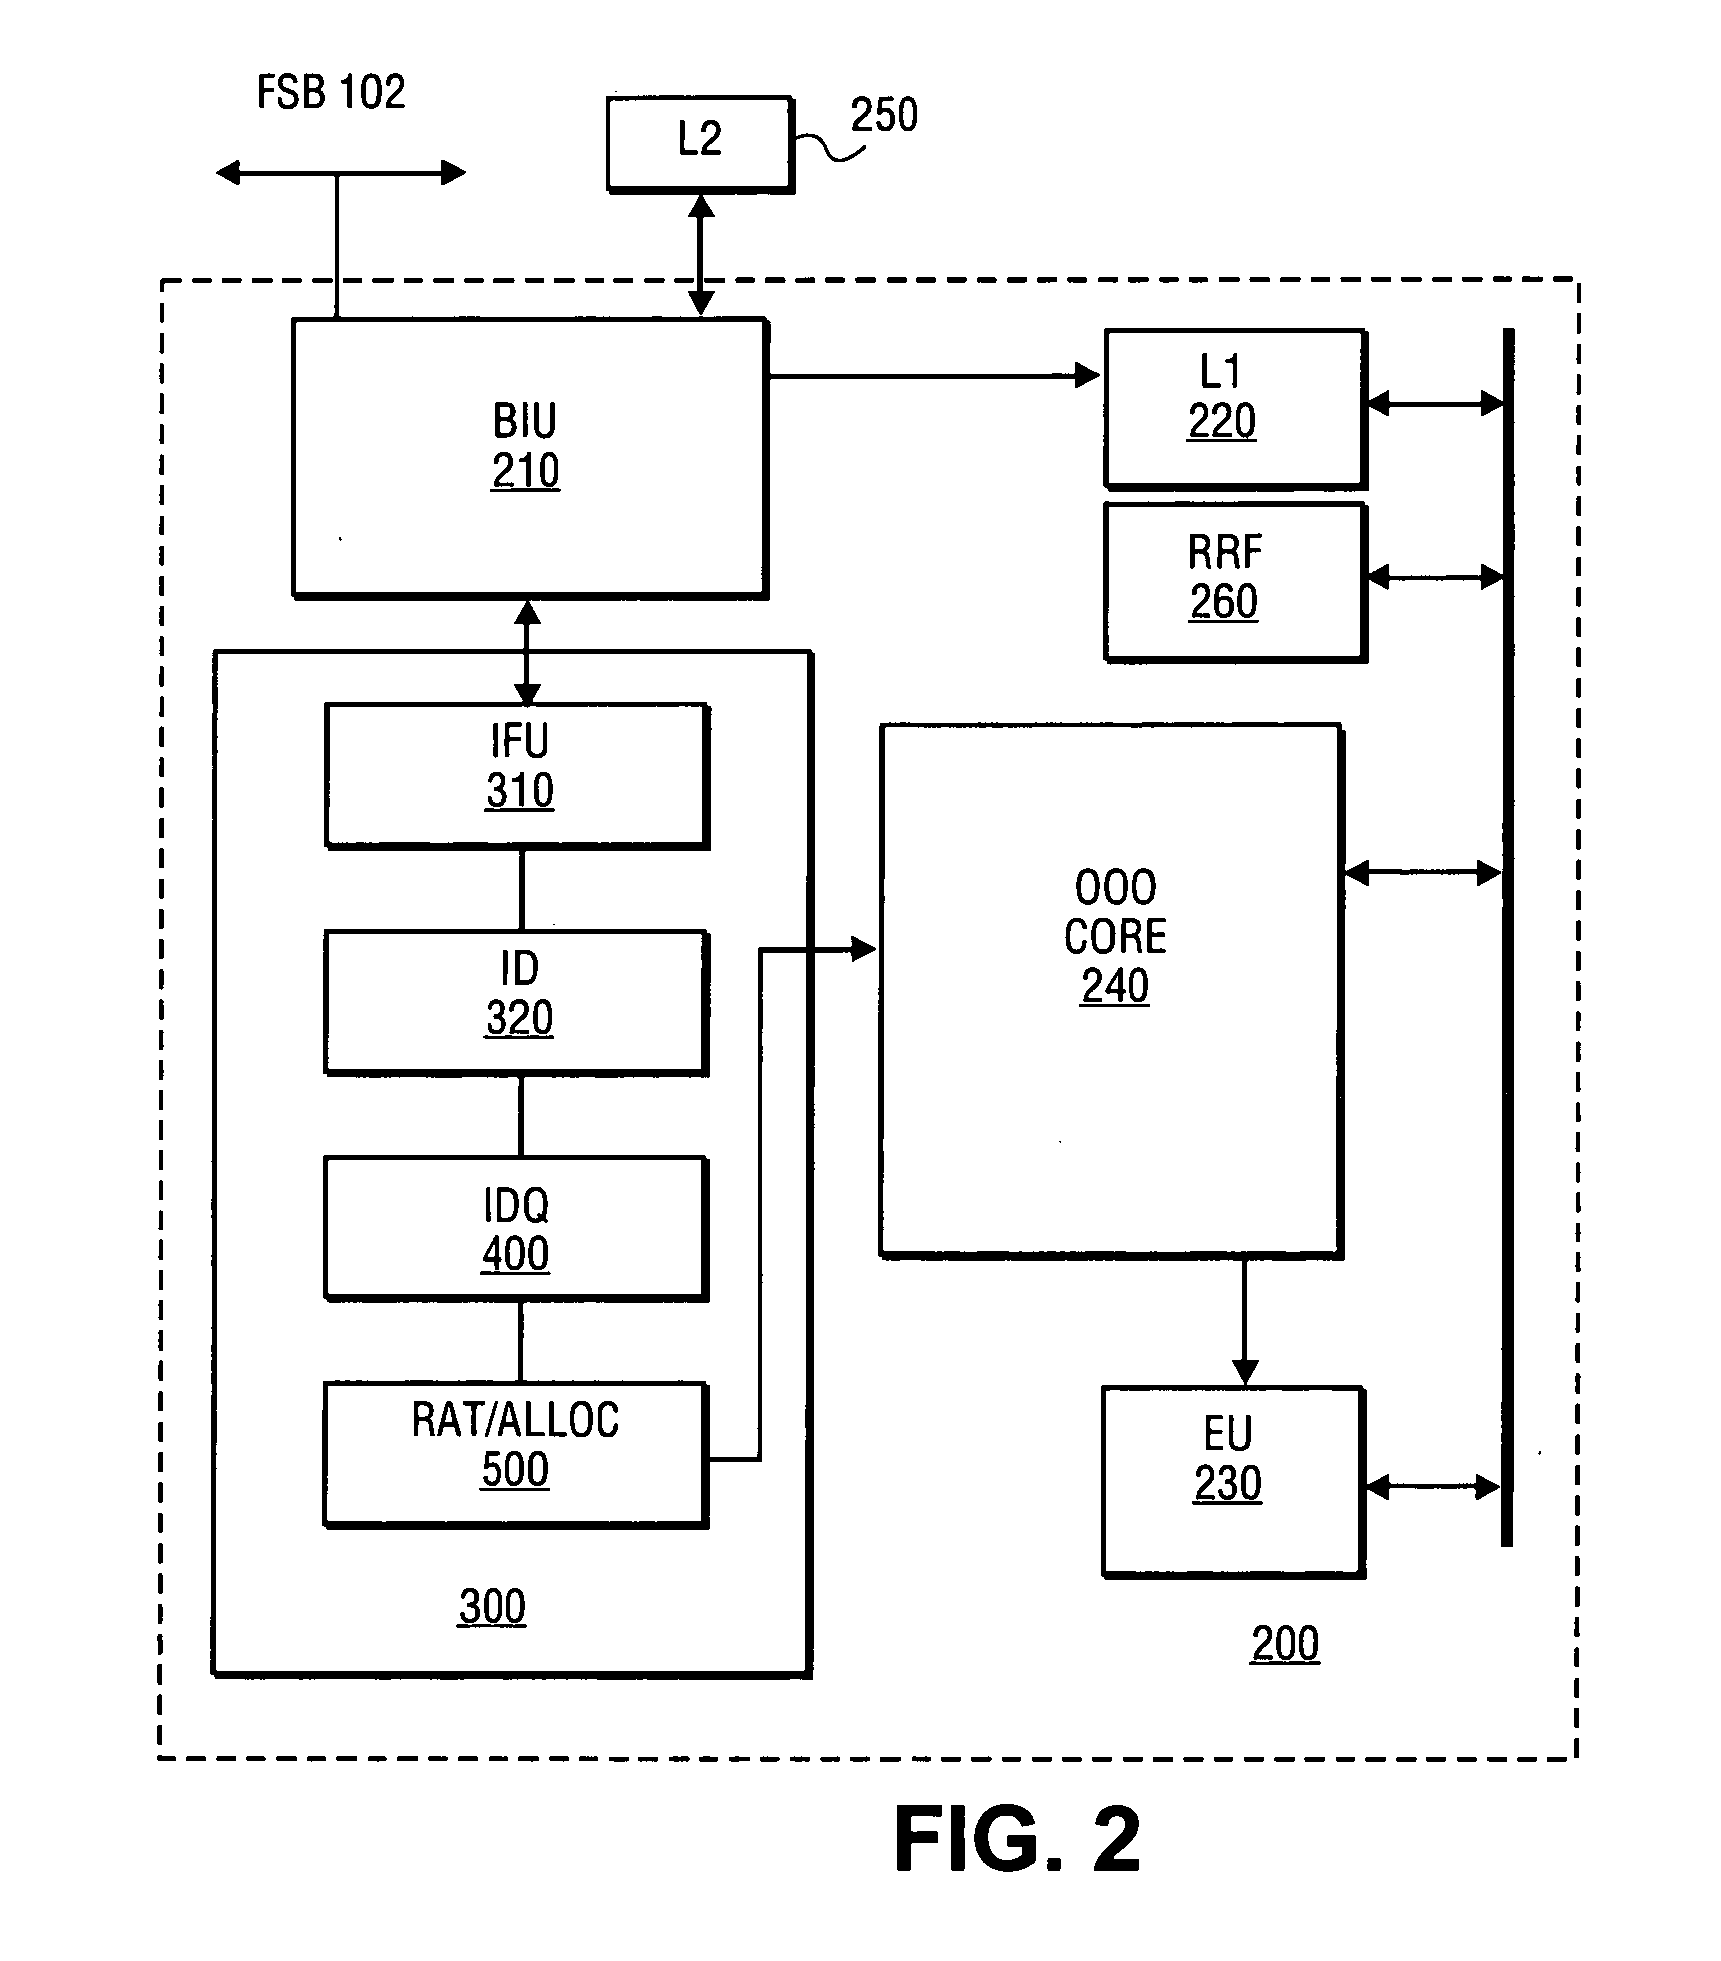 Apparatus and method for redundant zero micro-operation removal